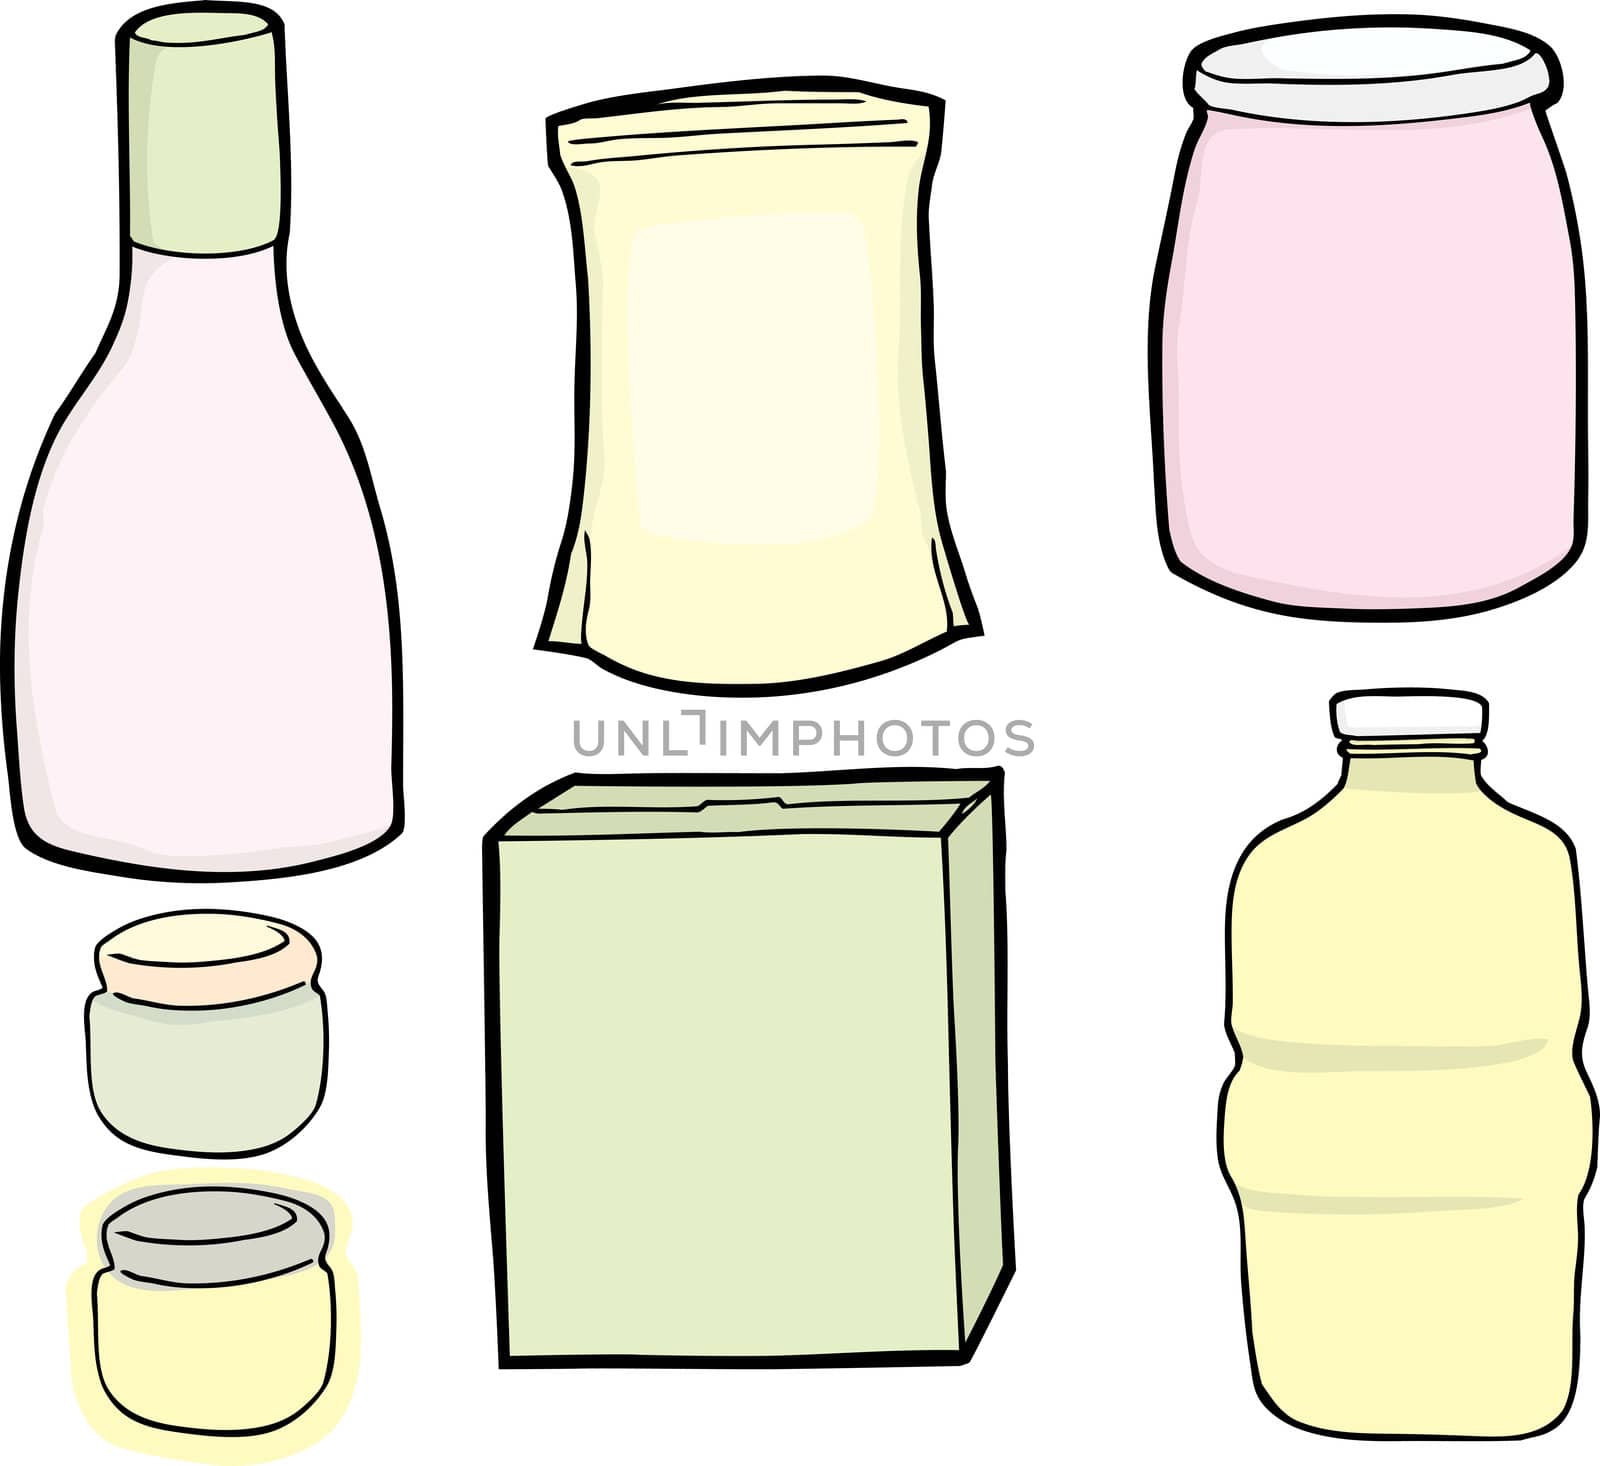 Drawings of a generic bottle, jars, box and bag used for food and drinks.